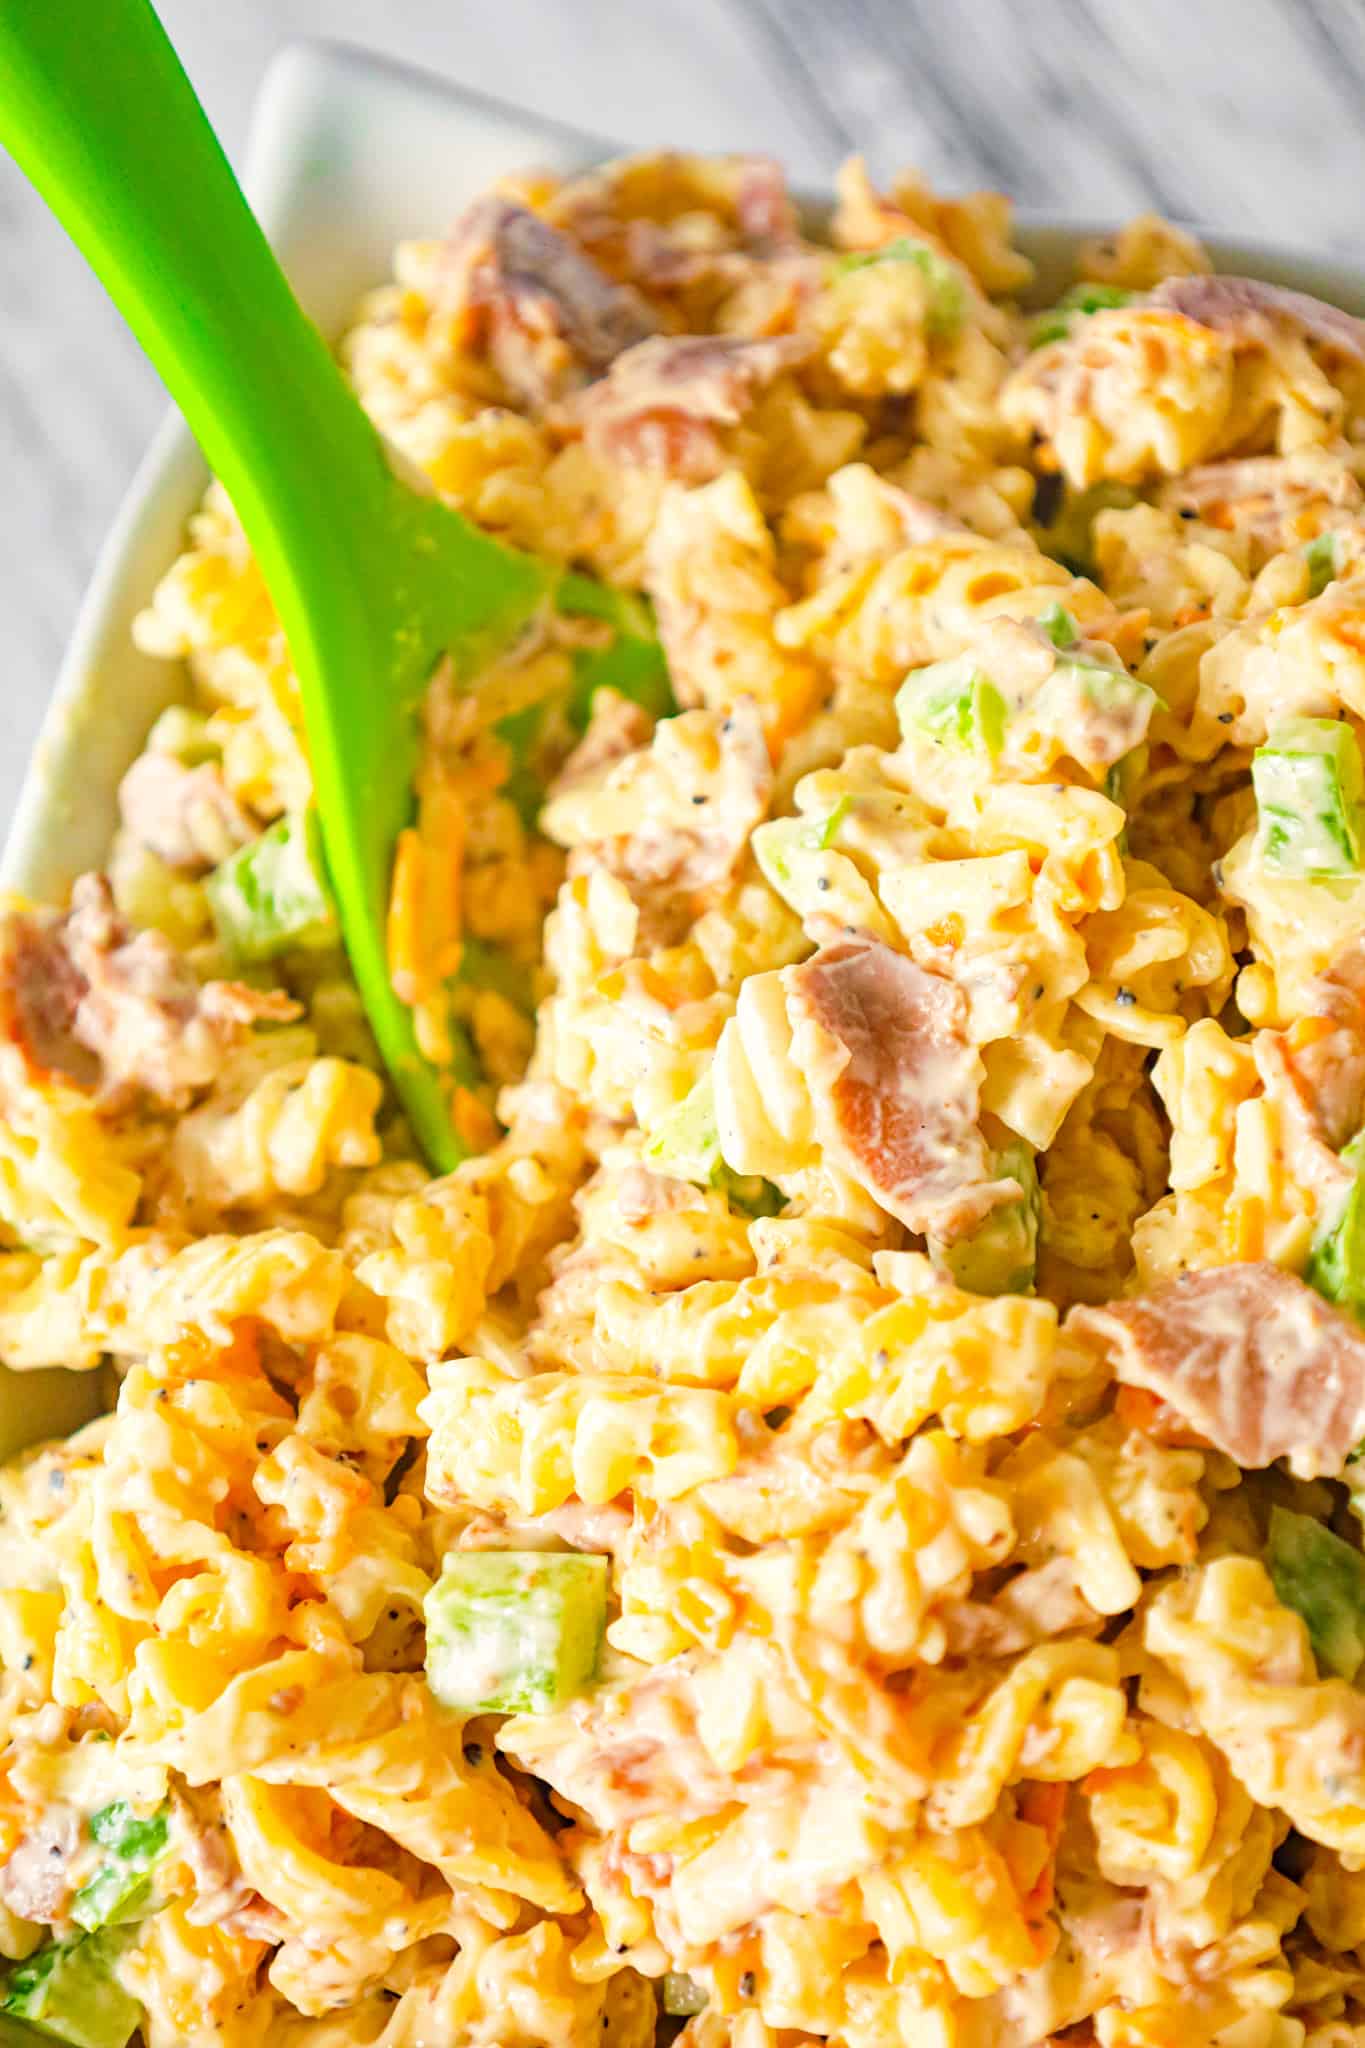 Philly Cheese Steak Pasta Salad is a tasty cold side dish recipe loaded with diced green peppers, onions, roast beef, mayo, shredded cheese and steak spice.